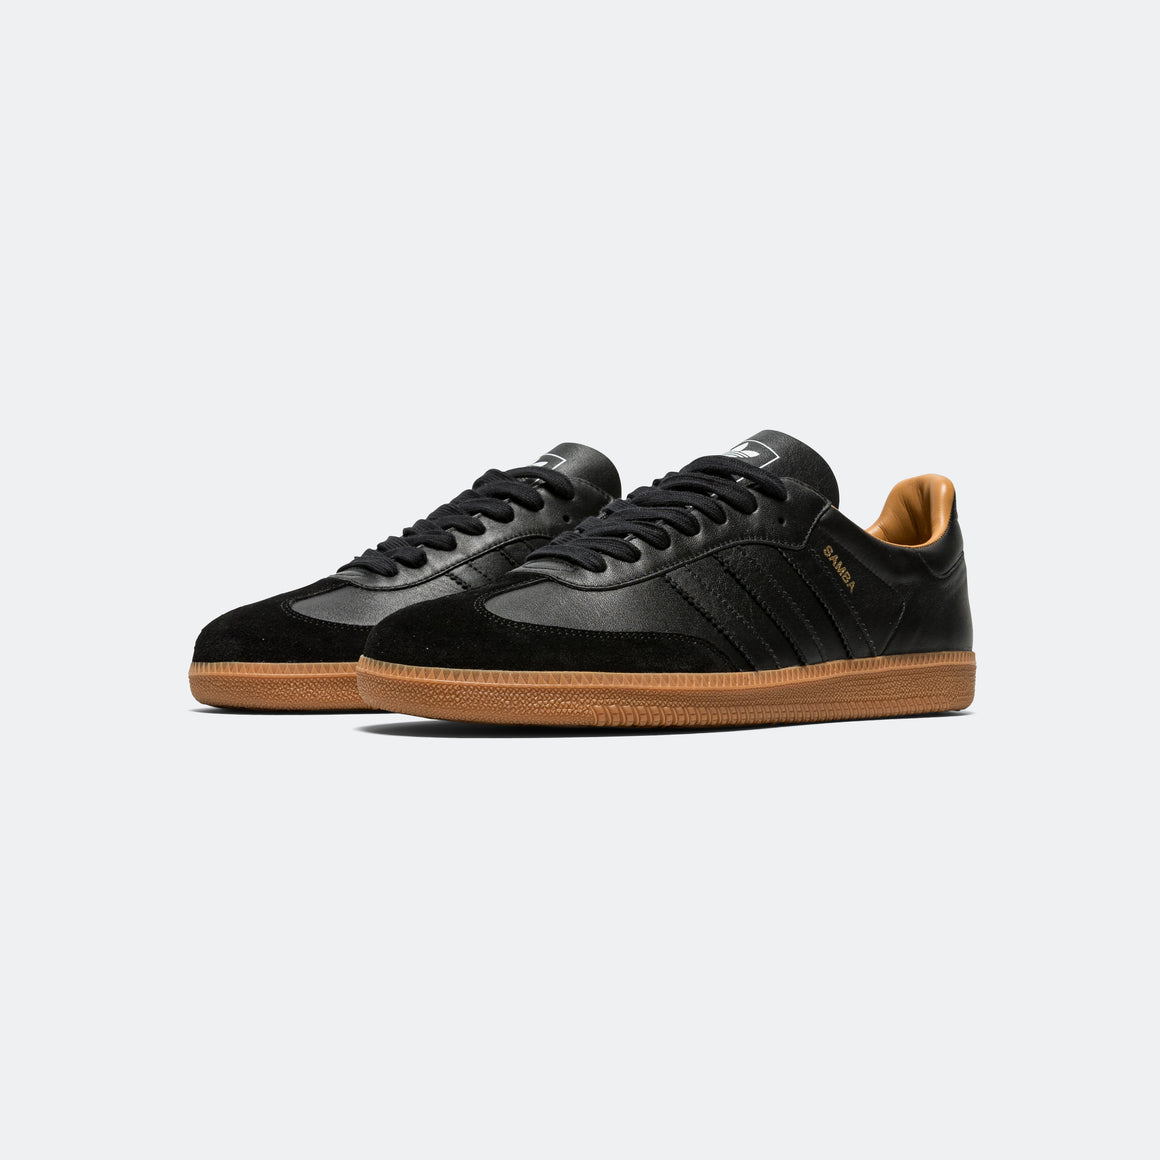 adidas - Samba OG Made In Italy - Core Black/Core White-Gum - UP THERE